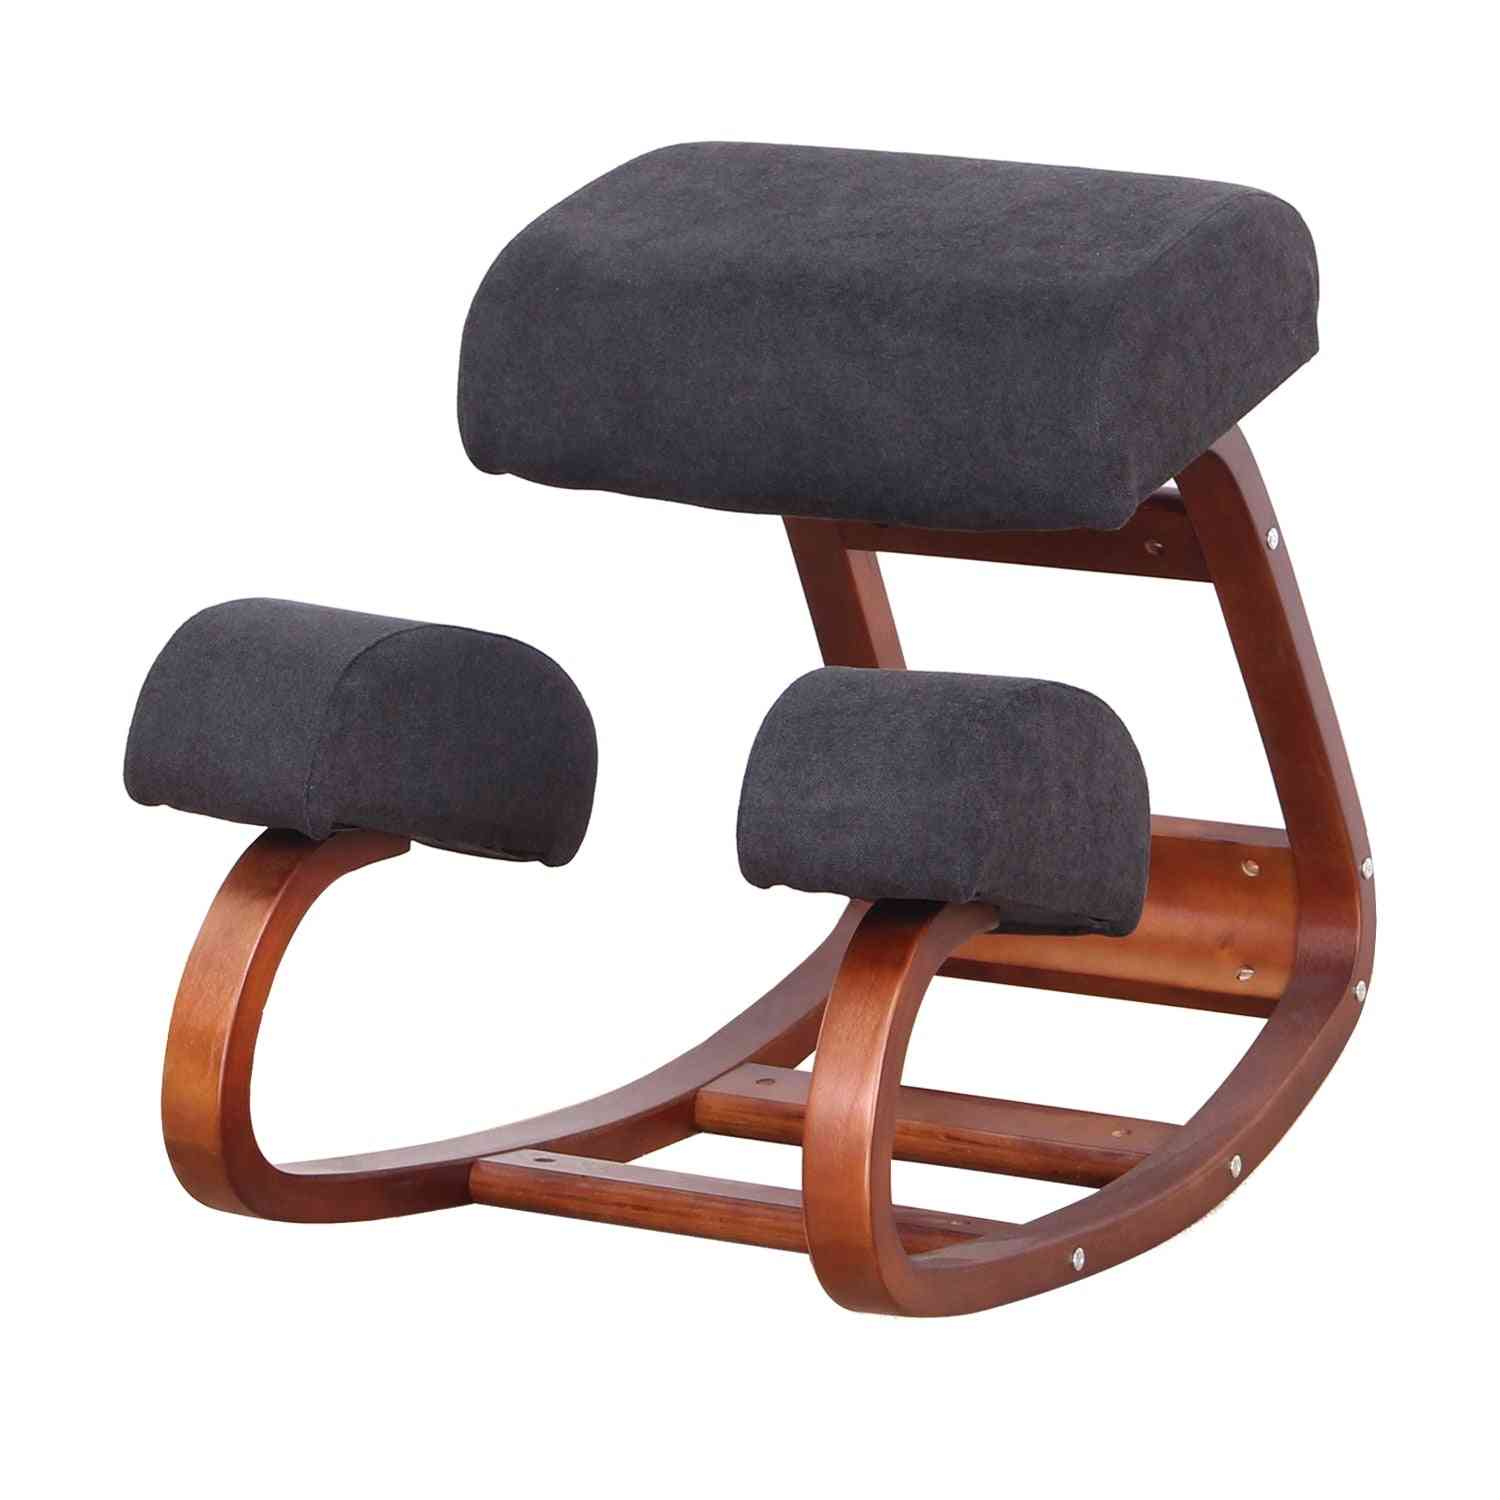 Knee Stool Perfect For Body Shaping And Stress Relief